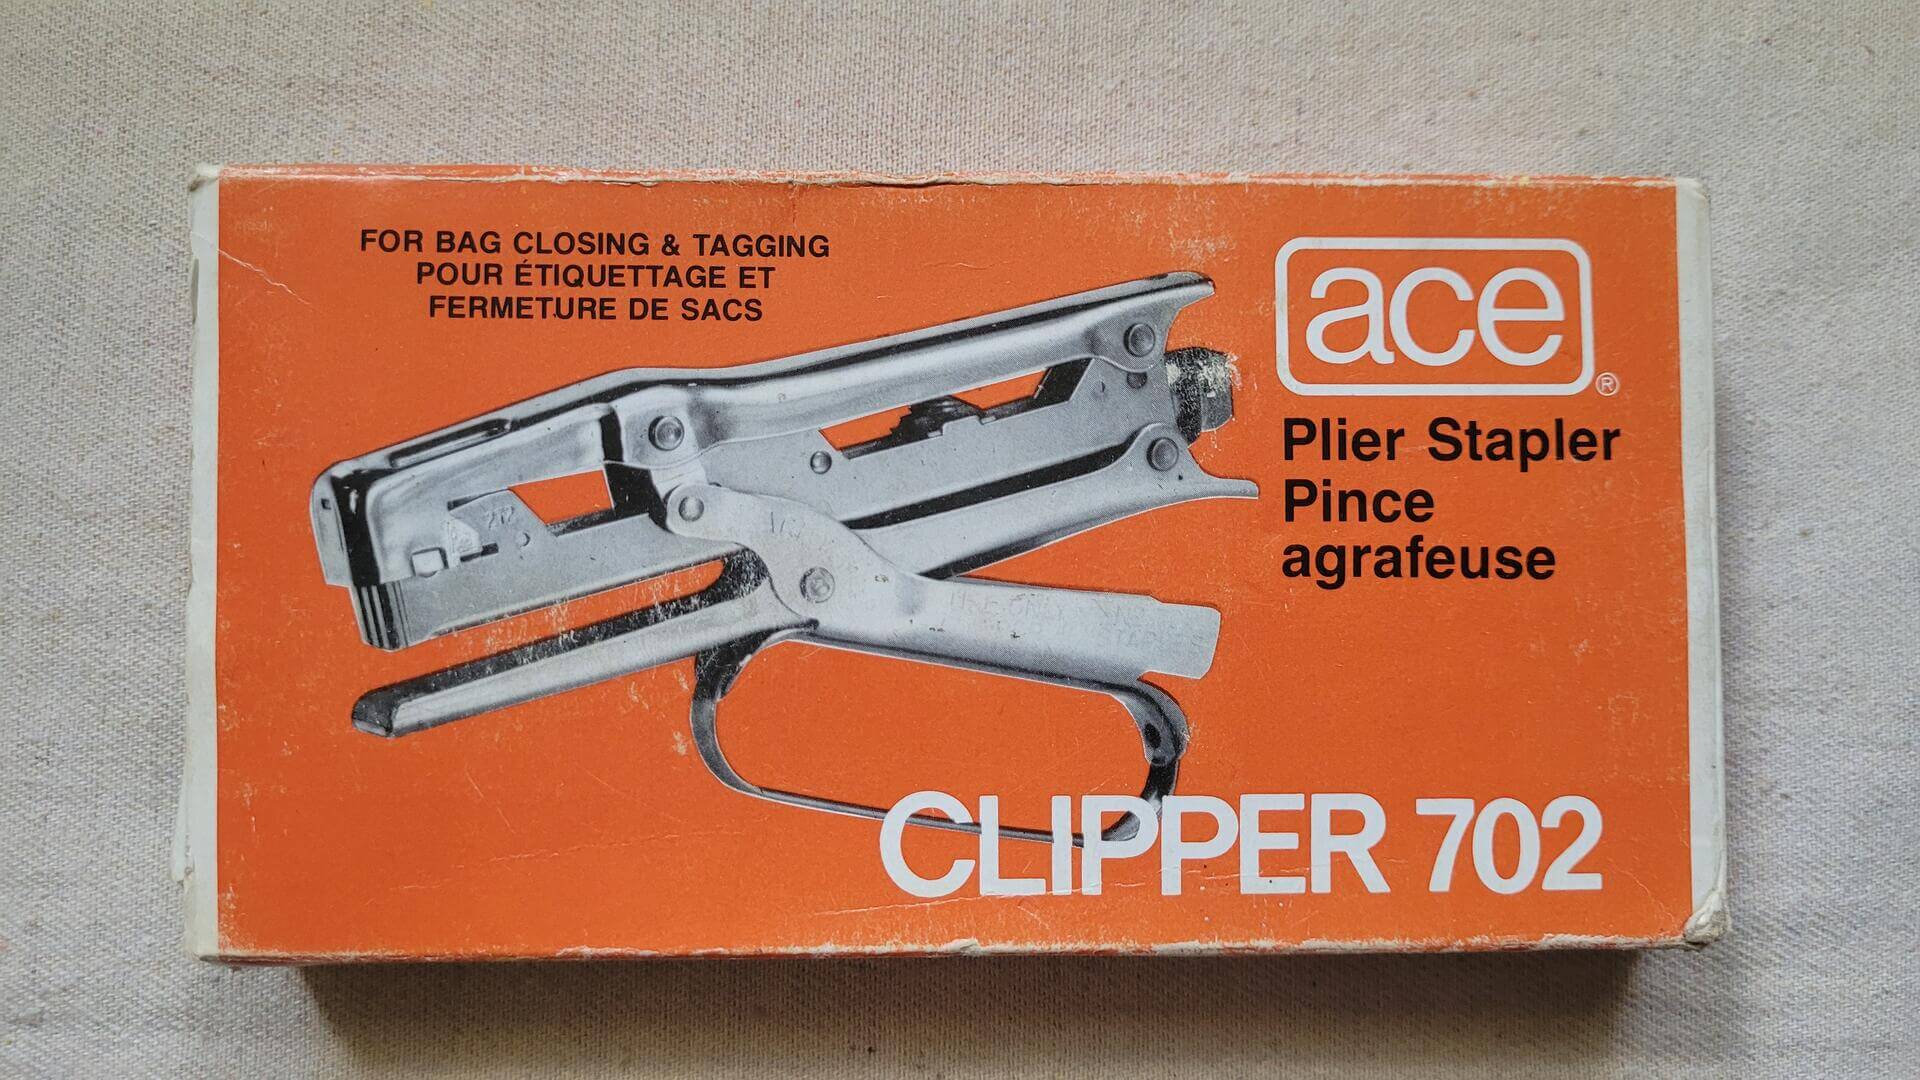 Vintage manual plier stapler Clipper 702 model in original box by Ace Fastener Corp from Chicago IL. Quality made in USA collectible hand tools